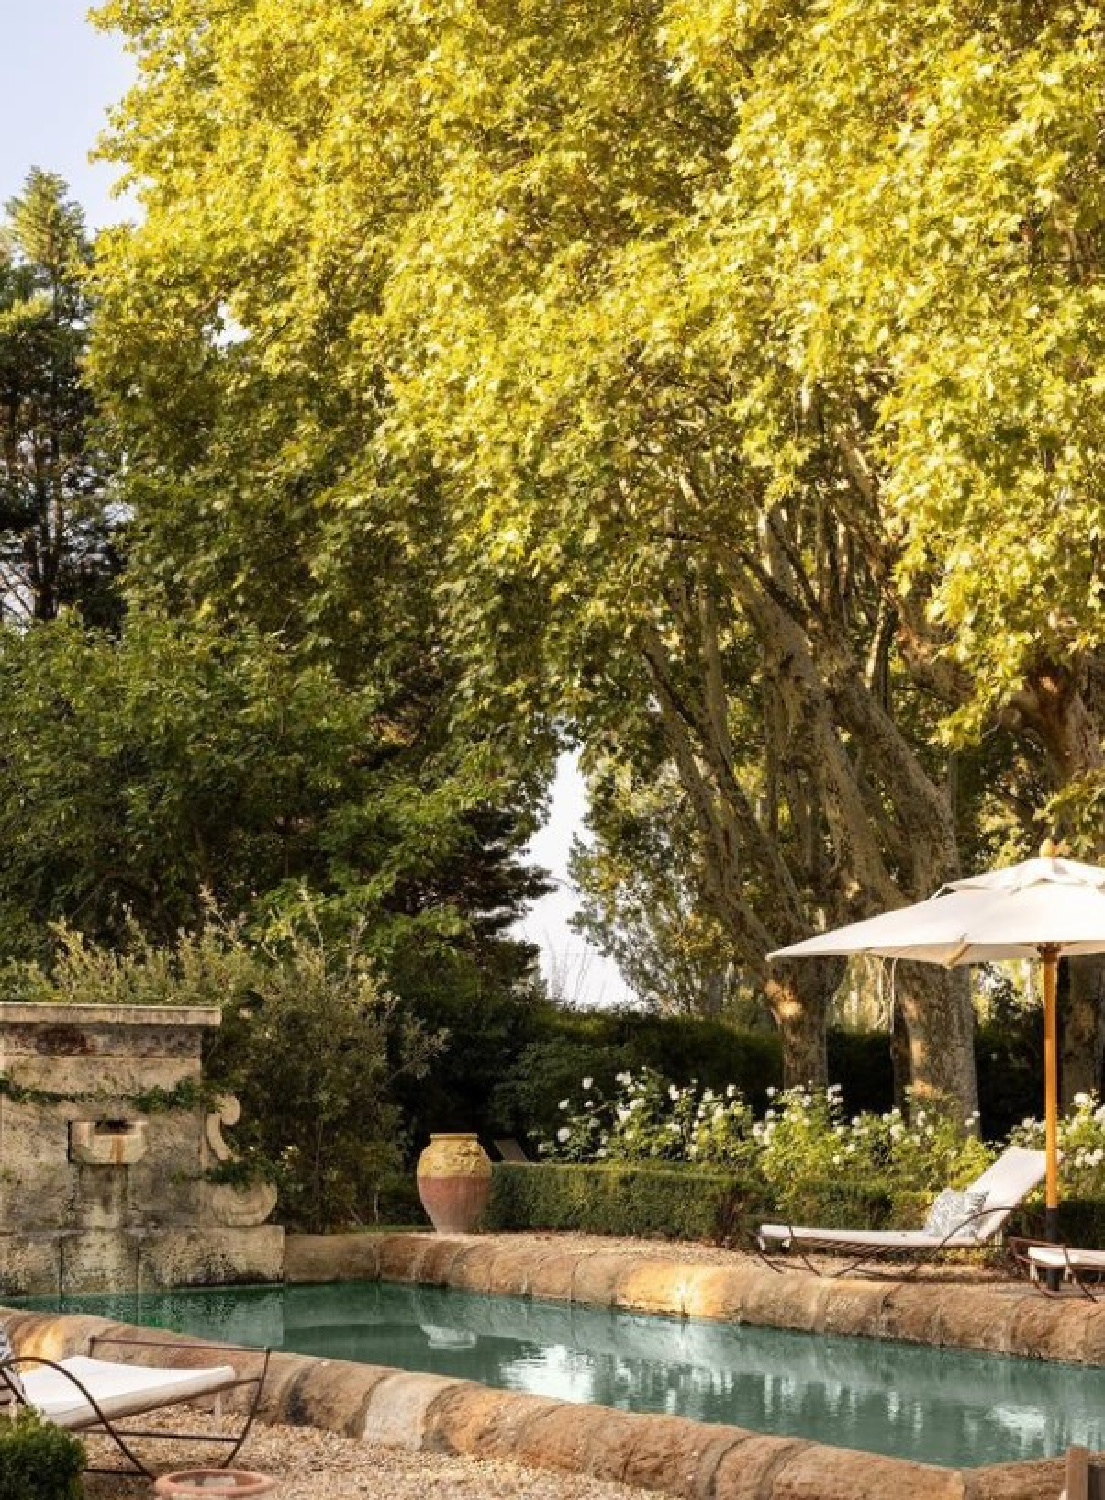 French country garden. Warm European luxury and cozy opulence in a French vacation villa in Provence - La Bastide de Laurence. #frenchbastide #frenchvilla #luxuryvilla #provencevilla #warmeuropeanluxury #cozyopulence #provencehomes #francetravel